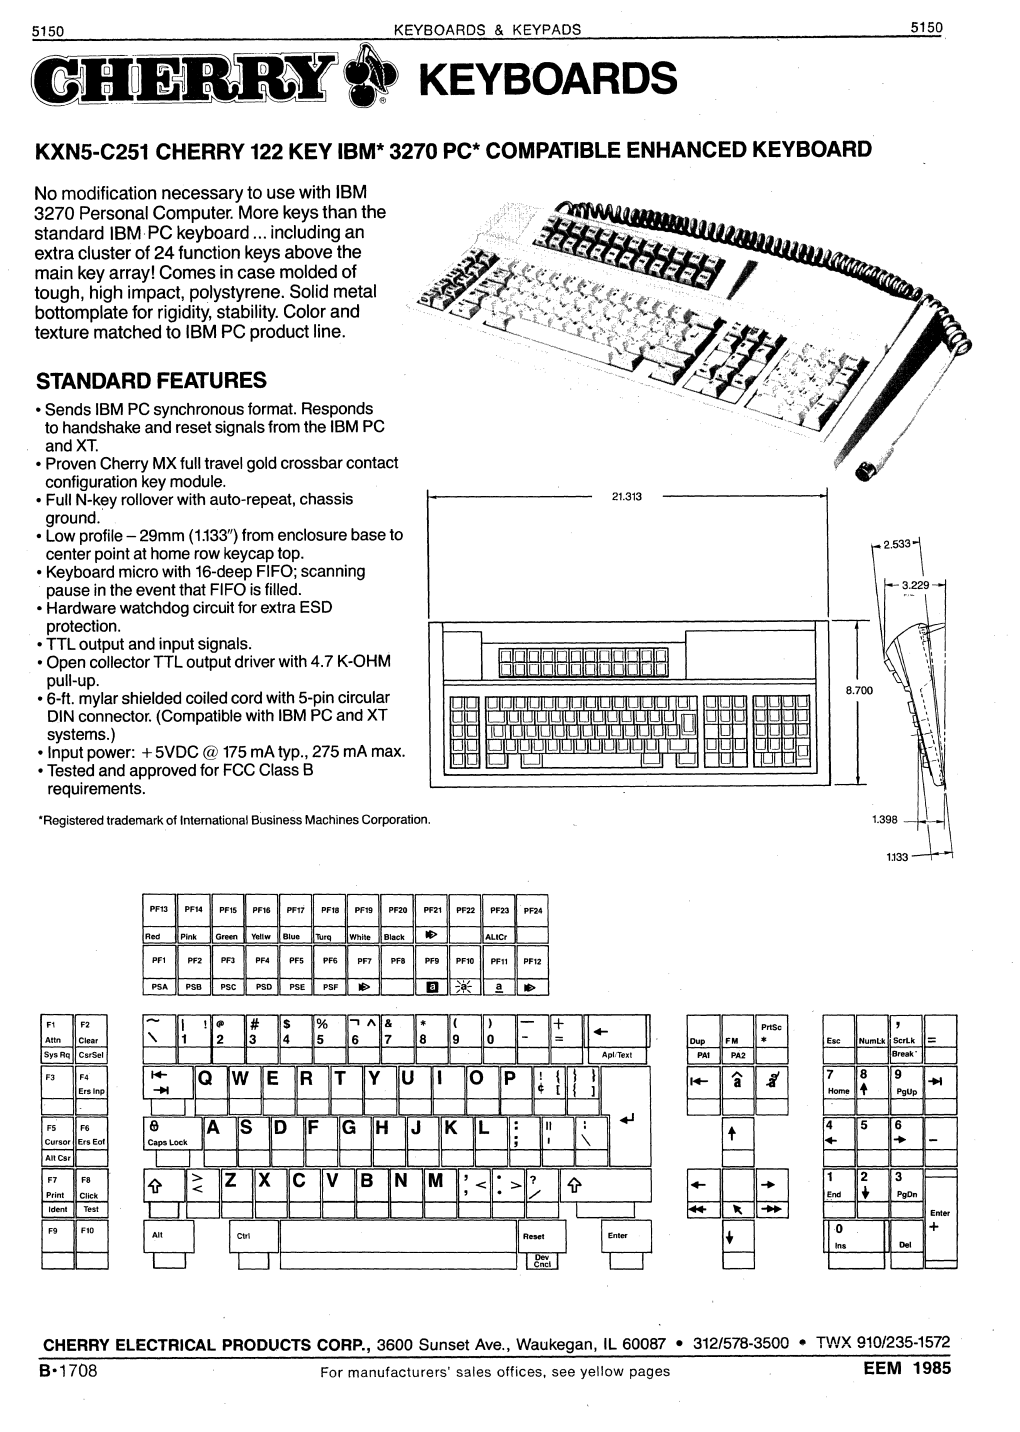 Cherry Electrical Products Corp. Keyboards, Keyboard Switches and Displays Advertisement, Electronic Engineers Master Catalog 19